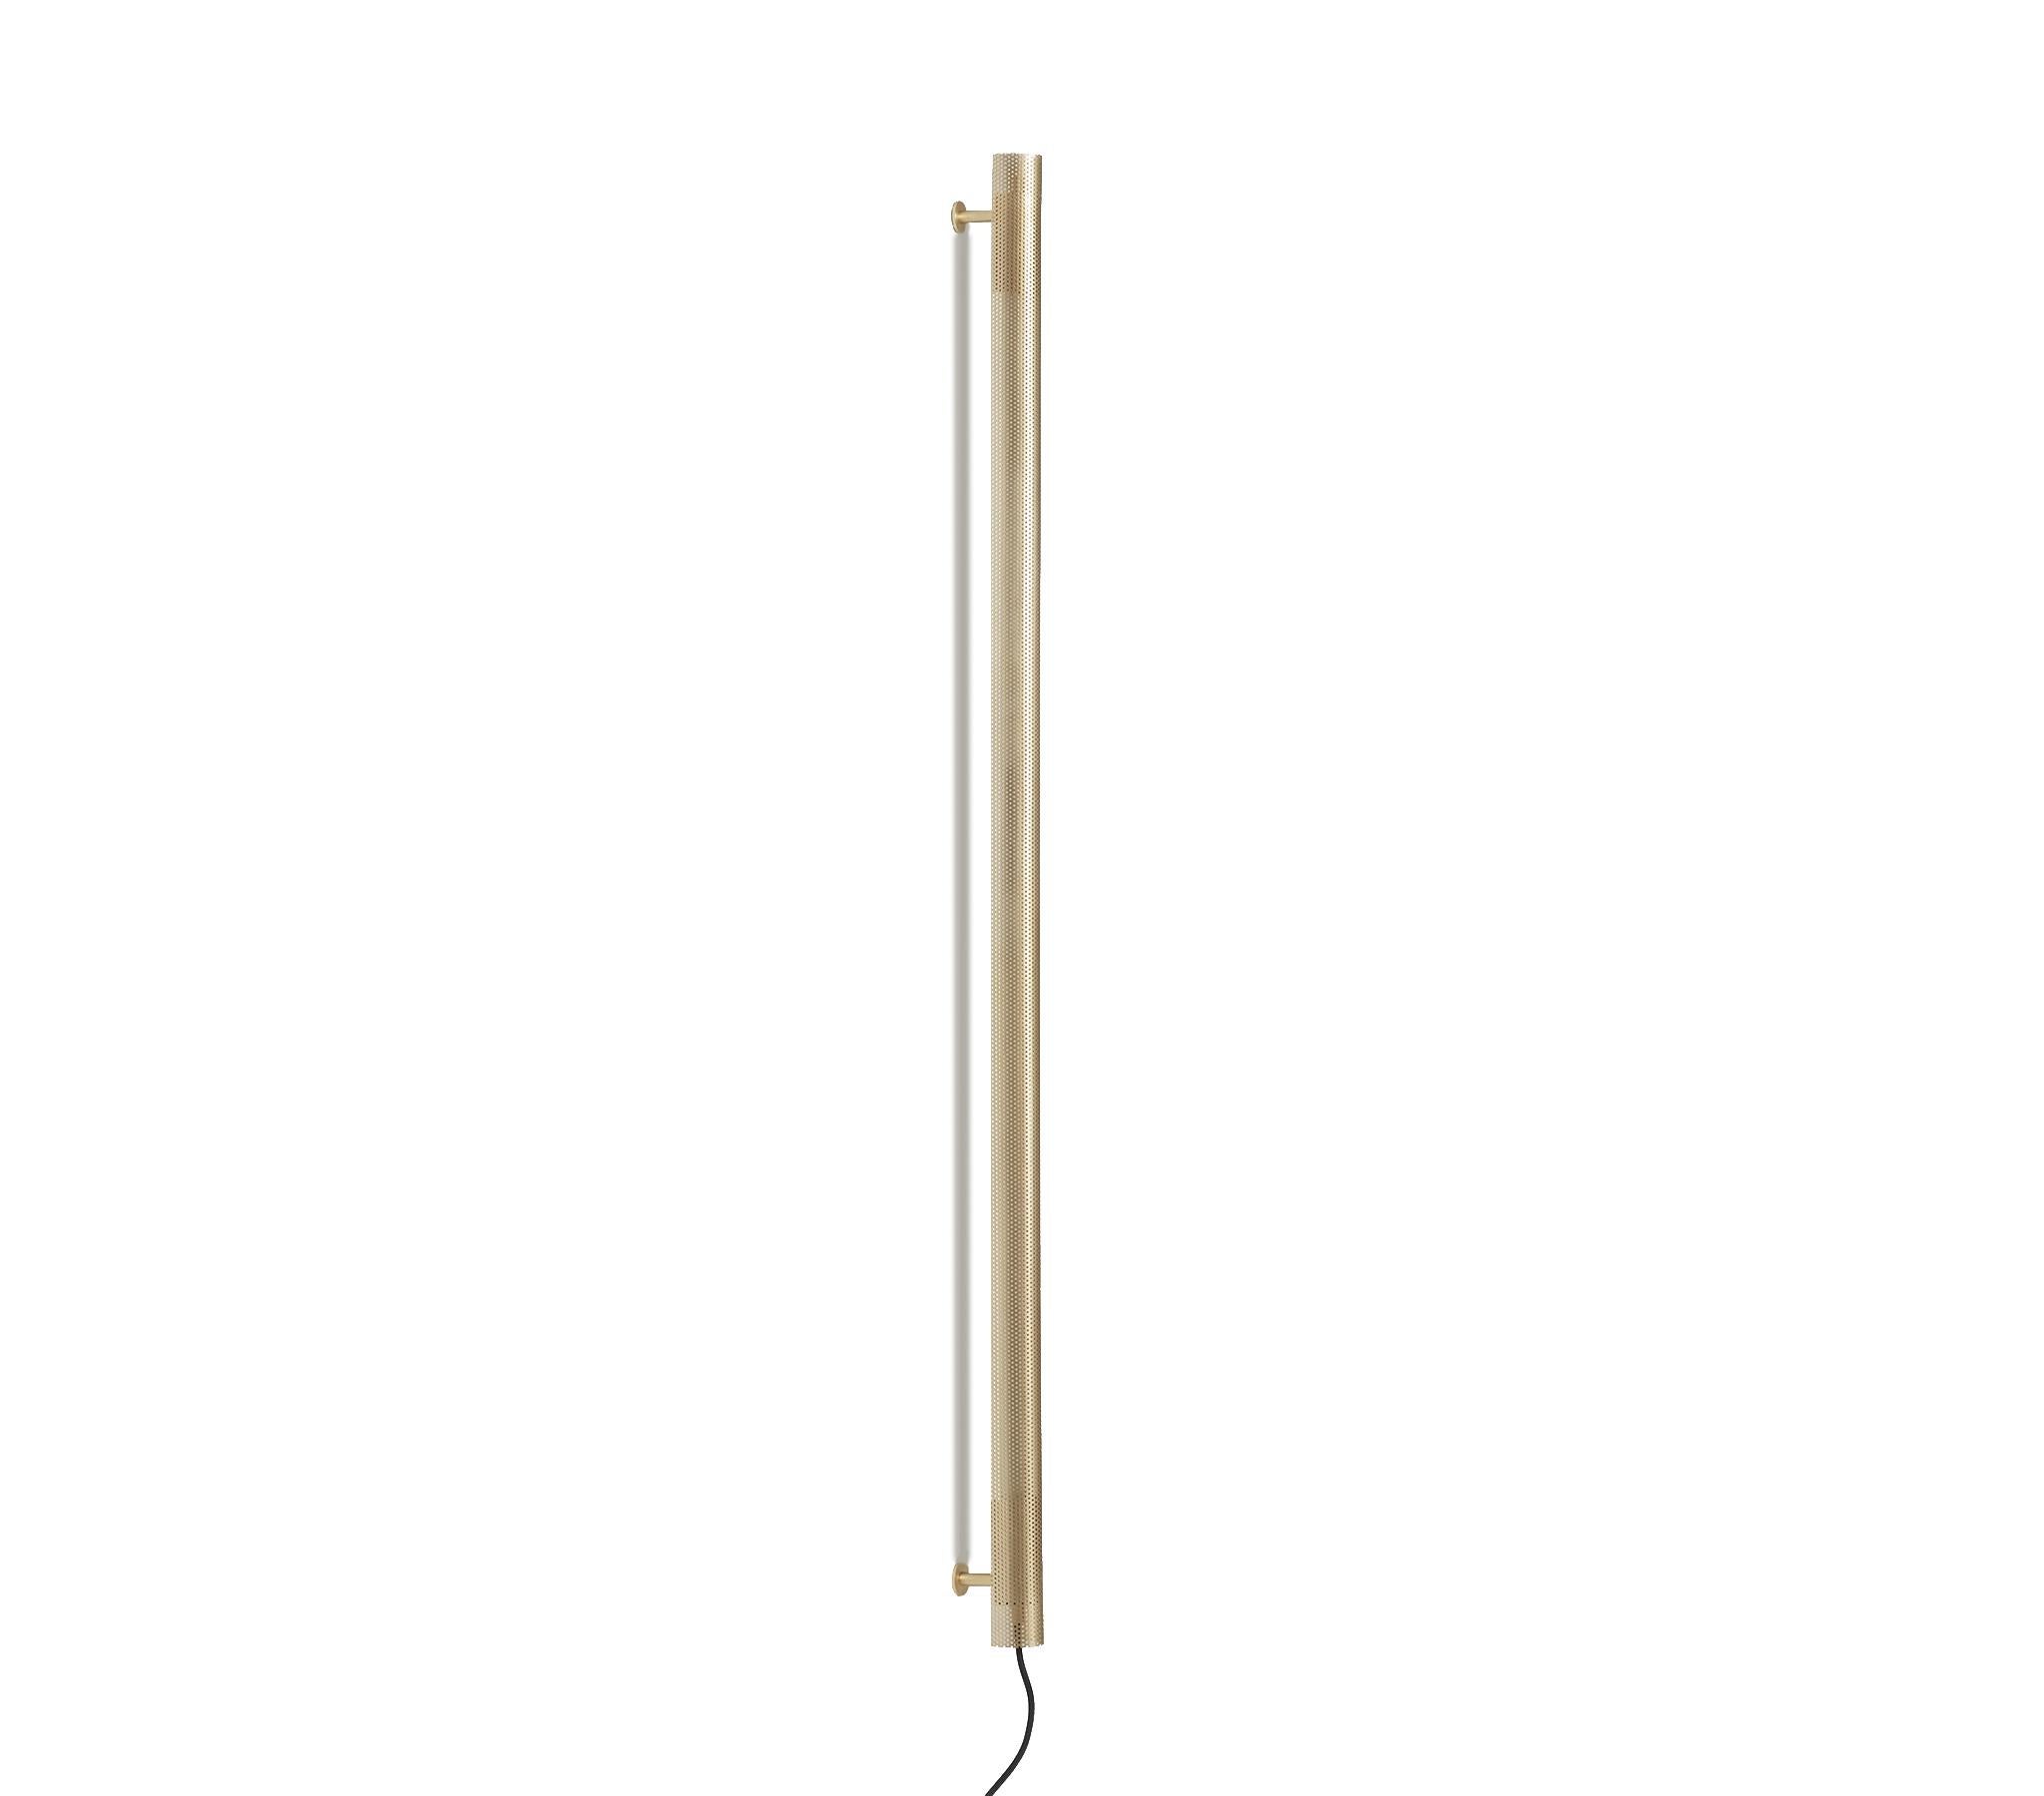 Radent wall lamp is based on a standard LED light and is a slim radiant linear wall lamp. The Radent Wall Lamp is available in two sizes with a black, white or brass finish.